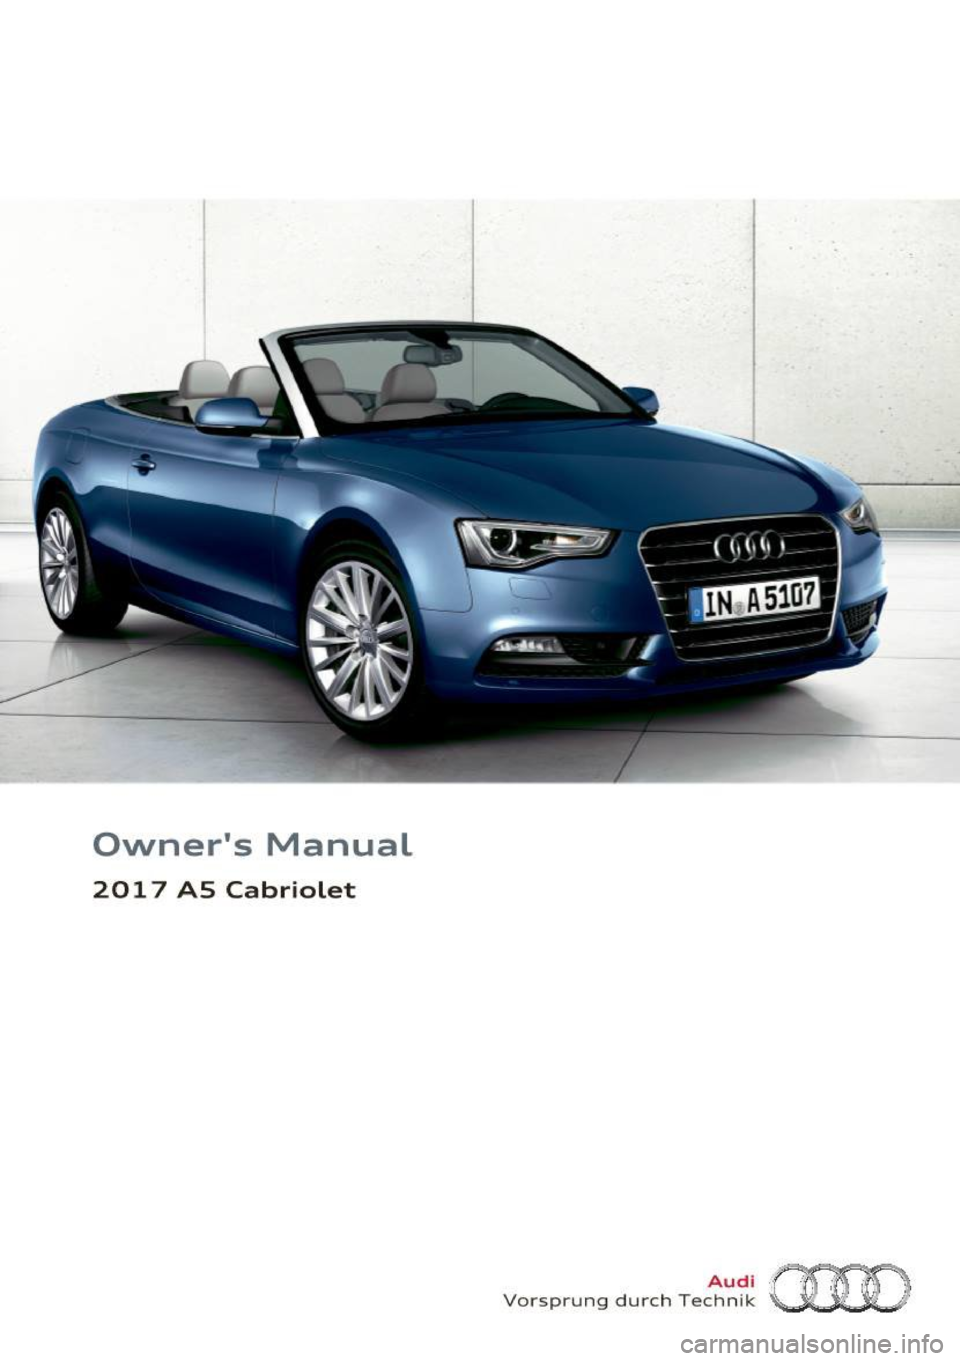 AUDI A5 CABRIOLET 2017  Owners Manual Owners  Manual 
201  7  AS  Cabriolet 
Vorsprung  durch Te~~?~ (HO  